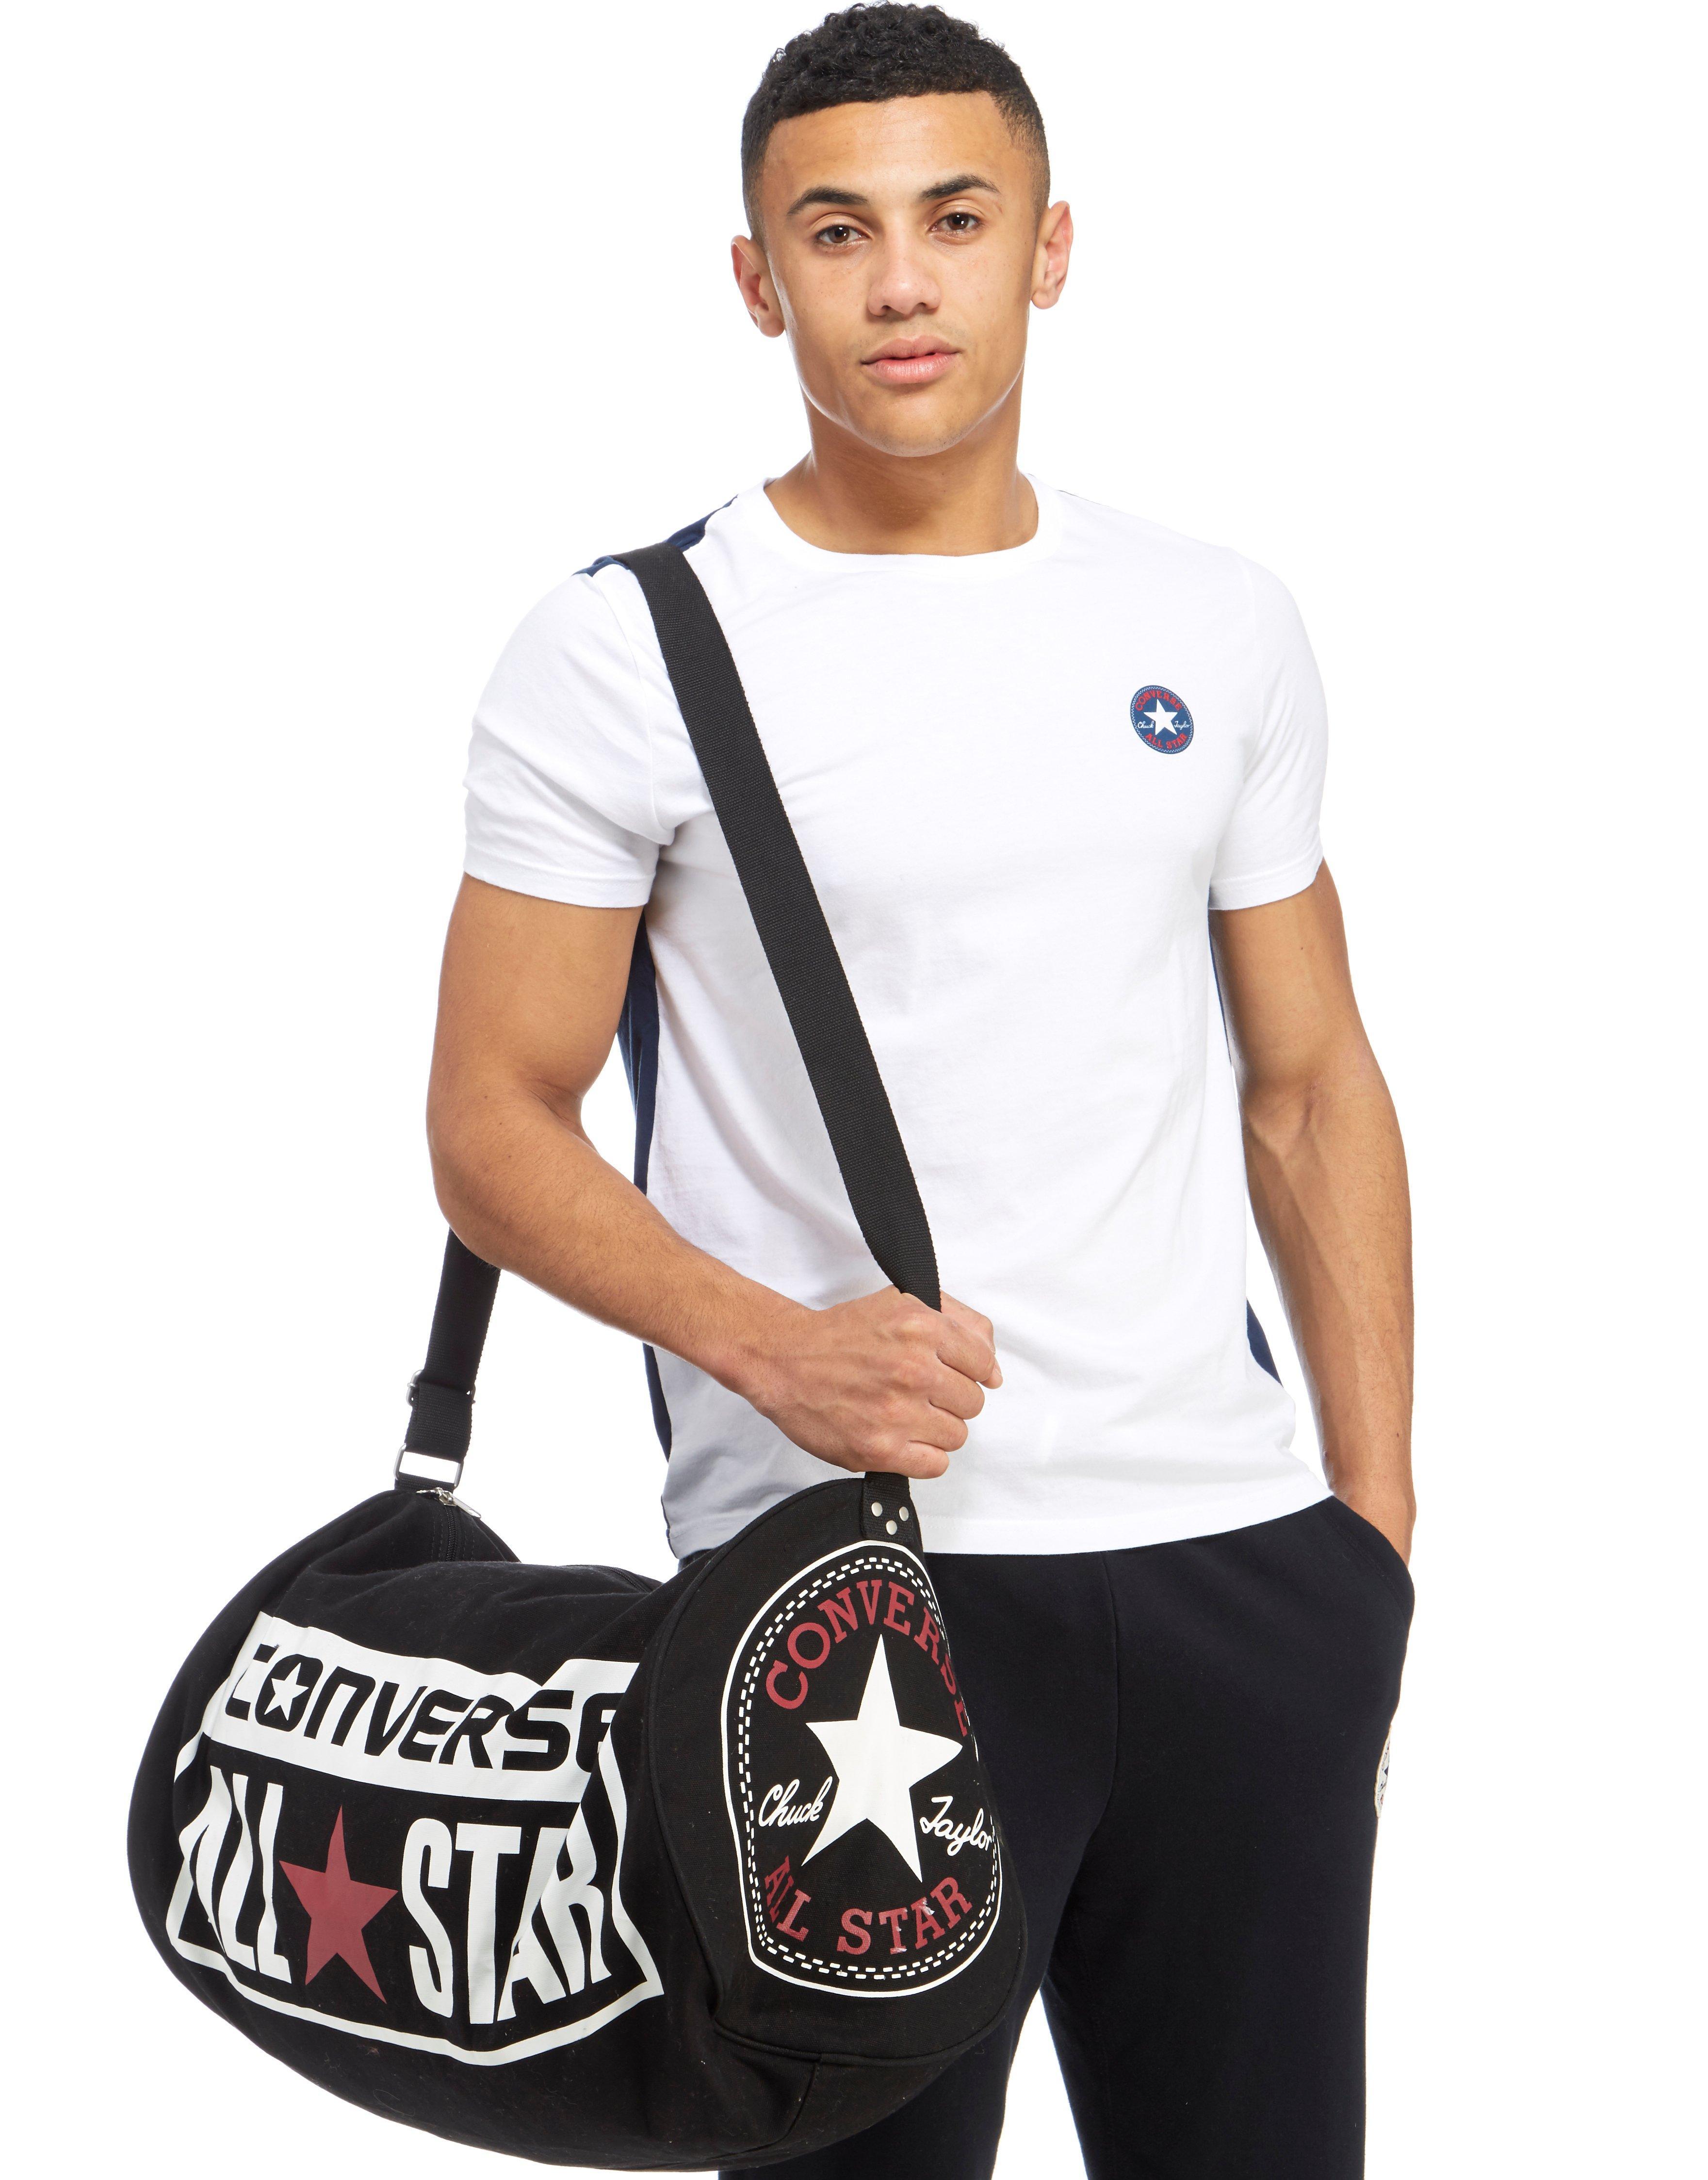 converse legacy duffle bag Online Shopping for Women, Men, Kids Fashion &  Lifestyle|Free Delivery & Returns! -